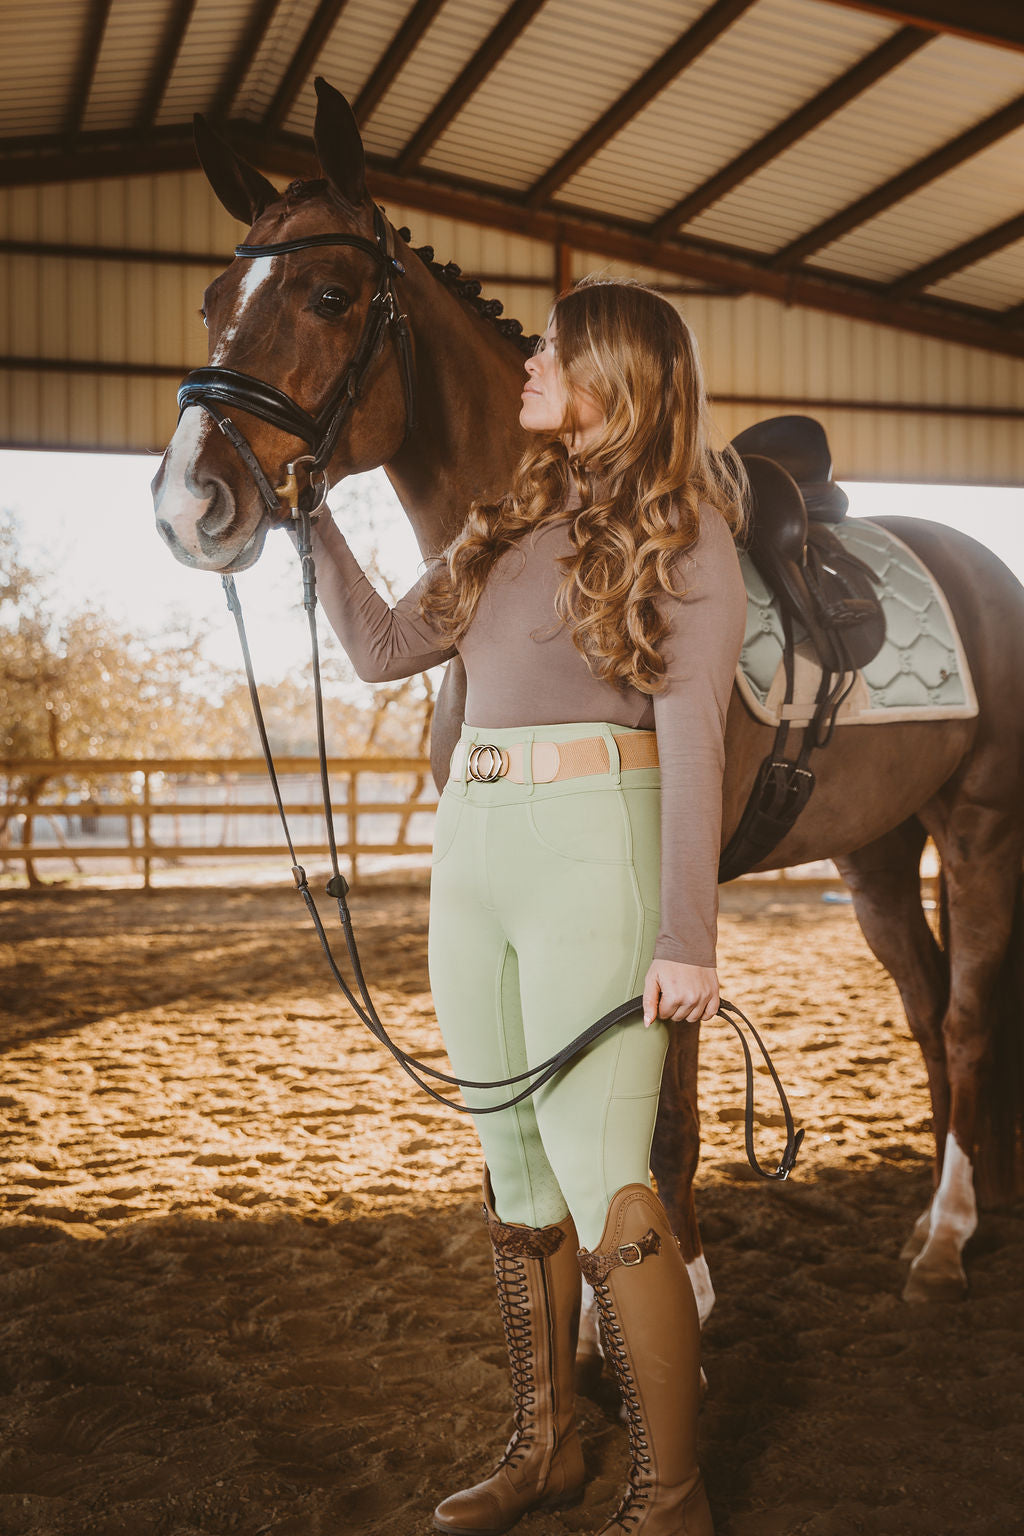 Canter Culture's green riding tight matches great with PS of Sweden Khaki saddle pad.